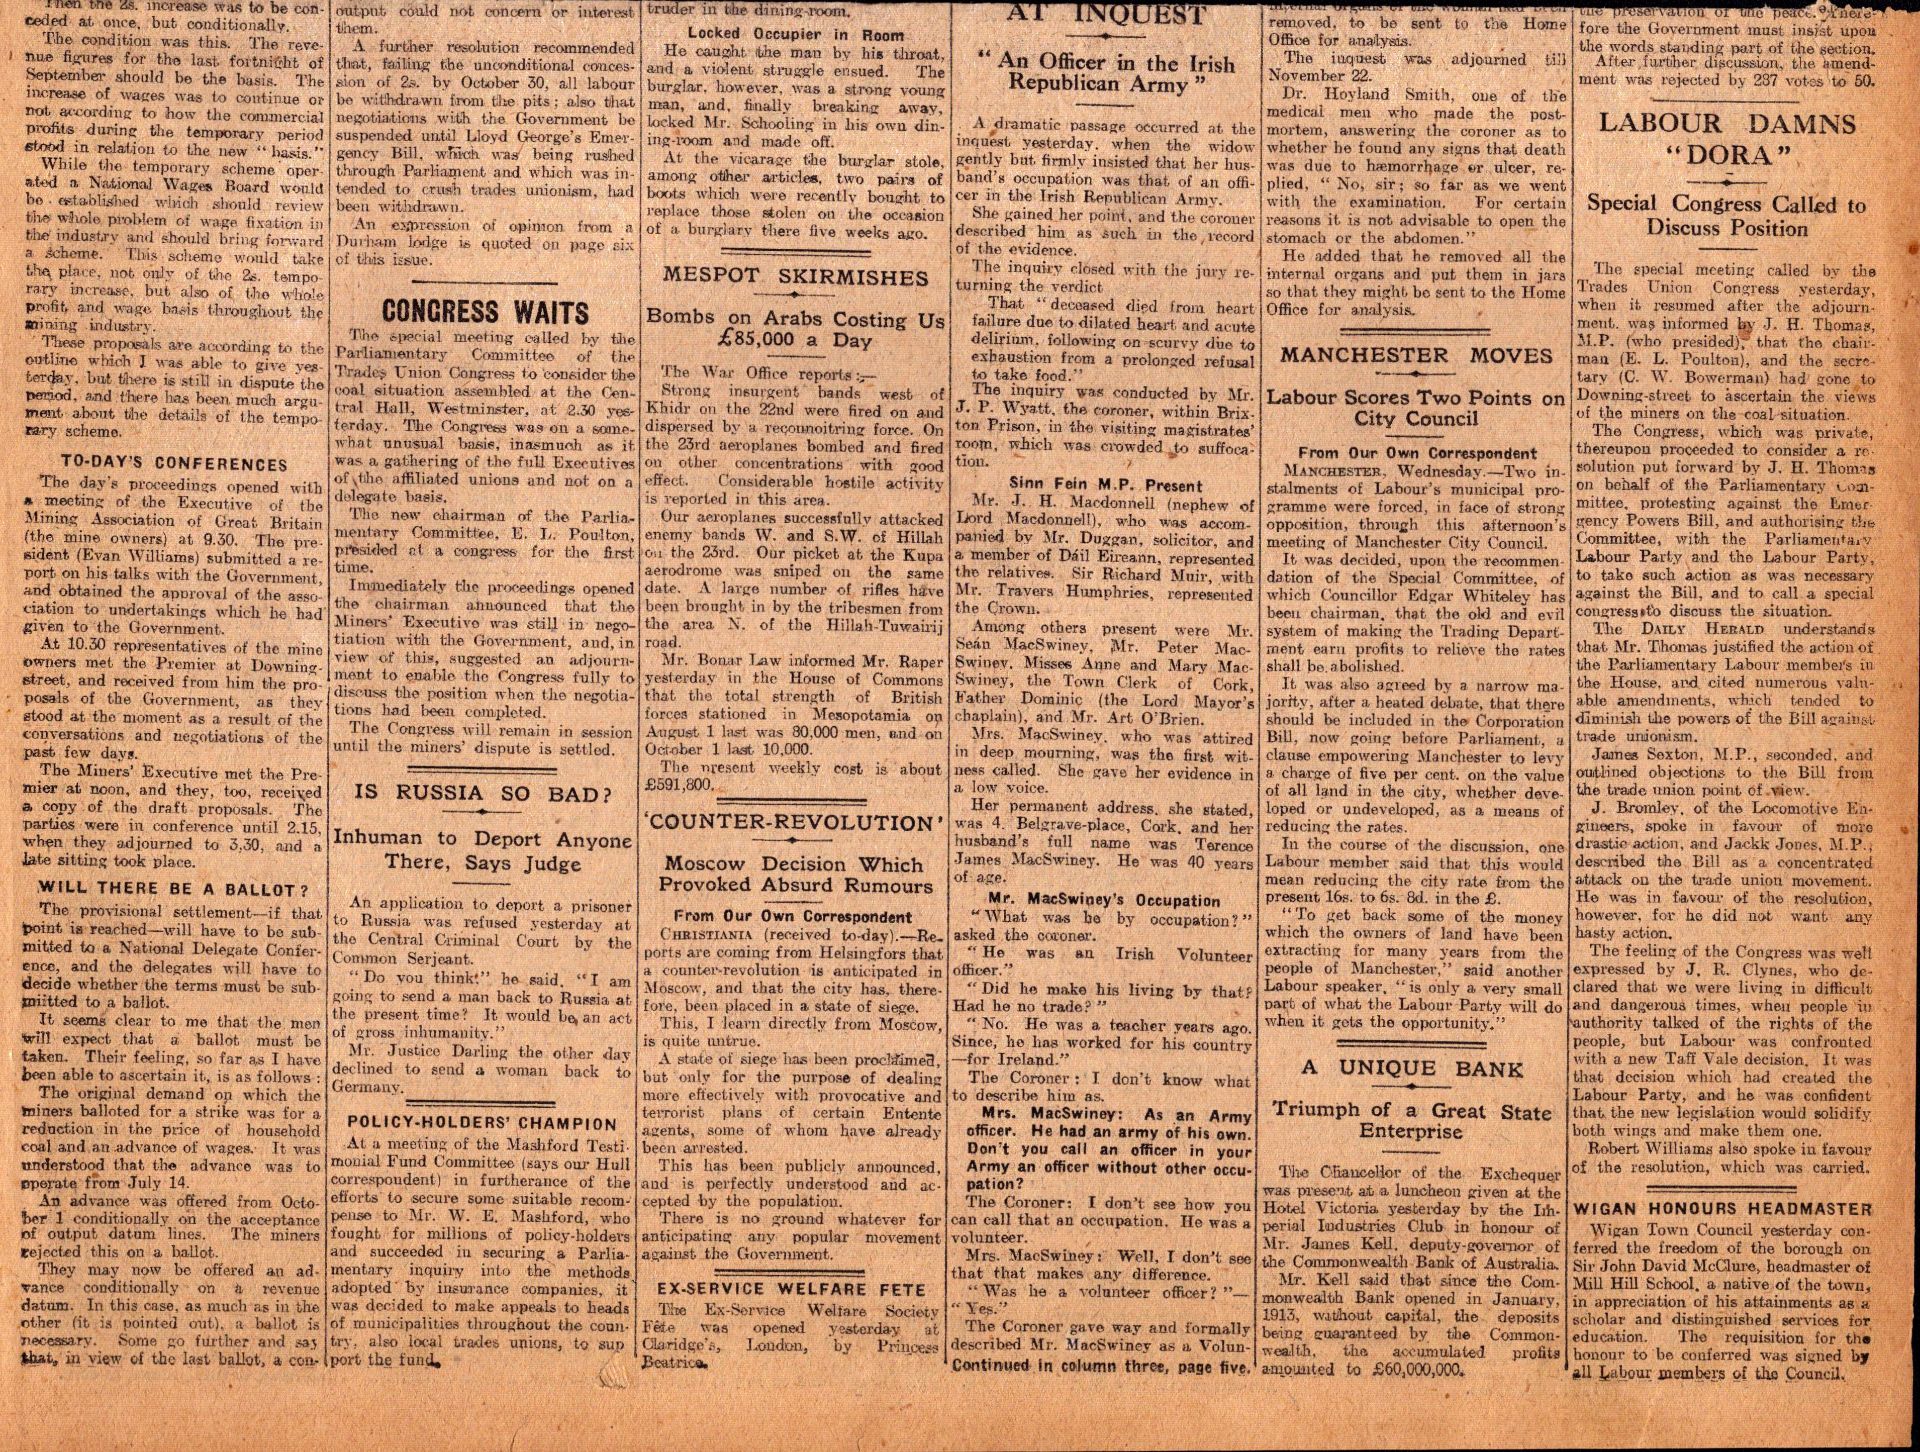 Irish War of Independence News Reports Black & Tans, Hunger Strikes 1920-13. - Image 2 of 5